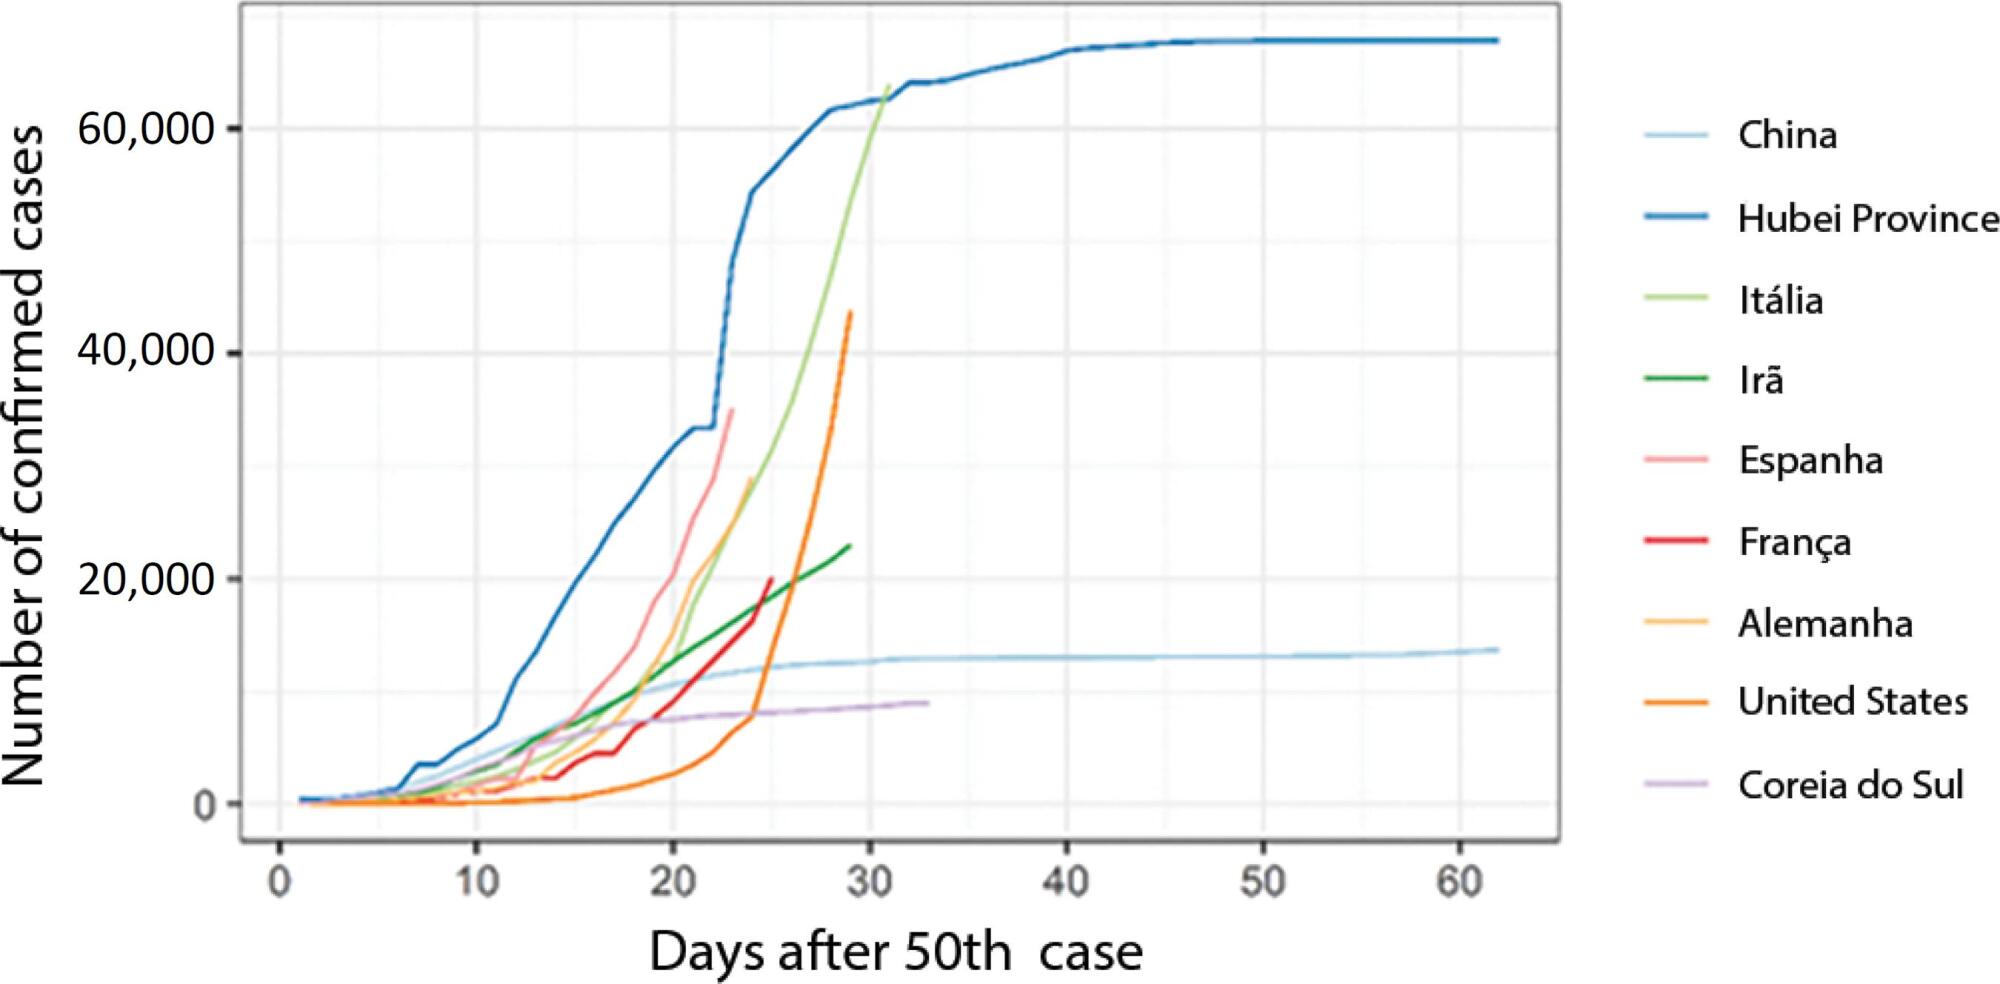 Progression of confirmed COVID-19 cases after the implementation of control measures